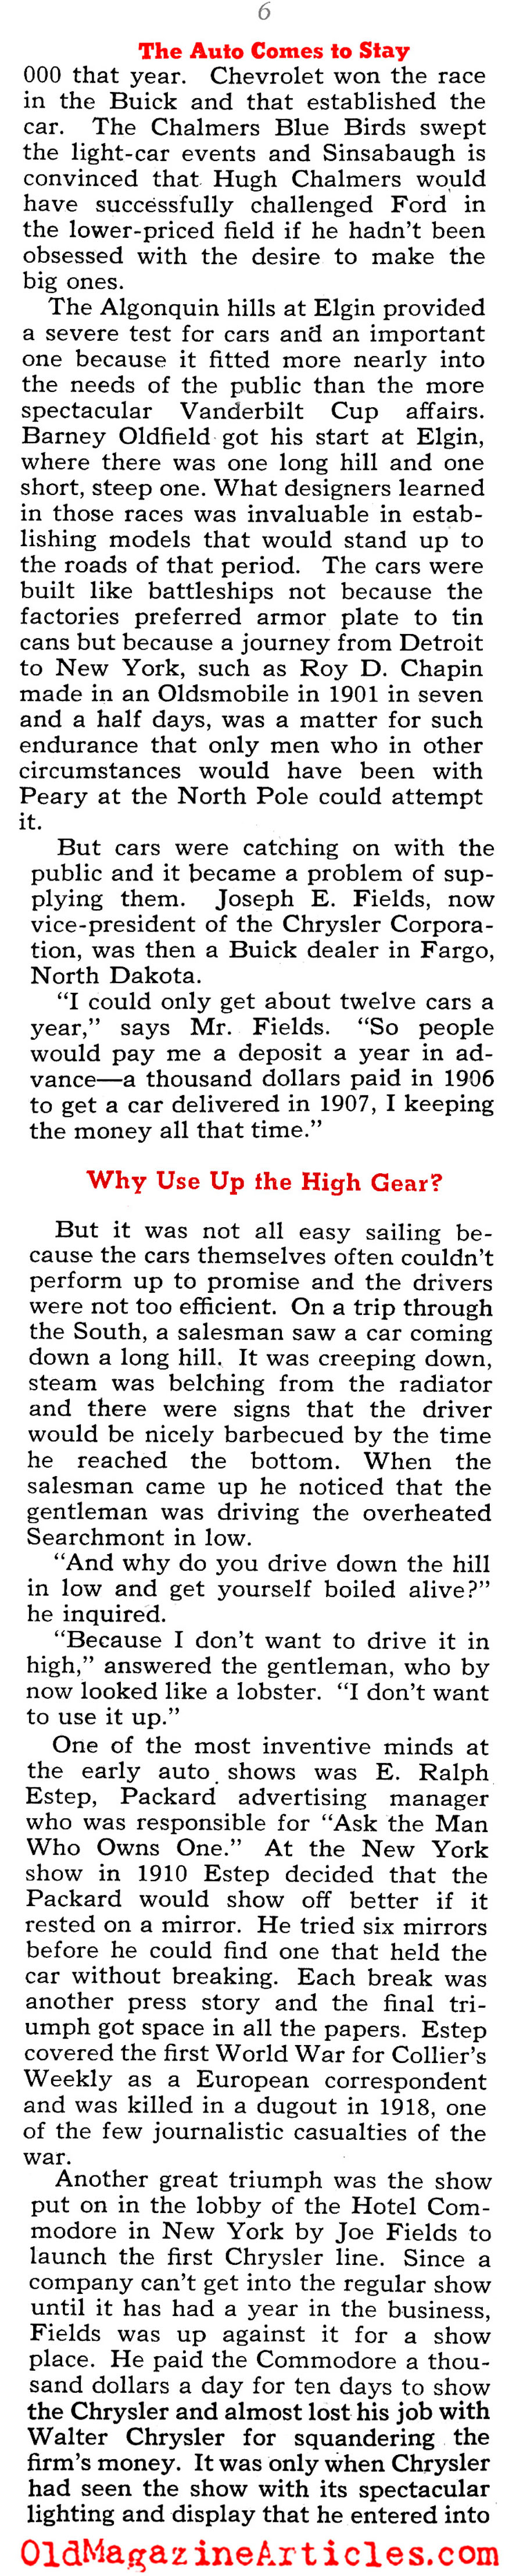 Cars are Here to Stay (Collier's Magazine, 1940)